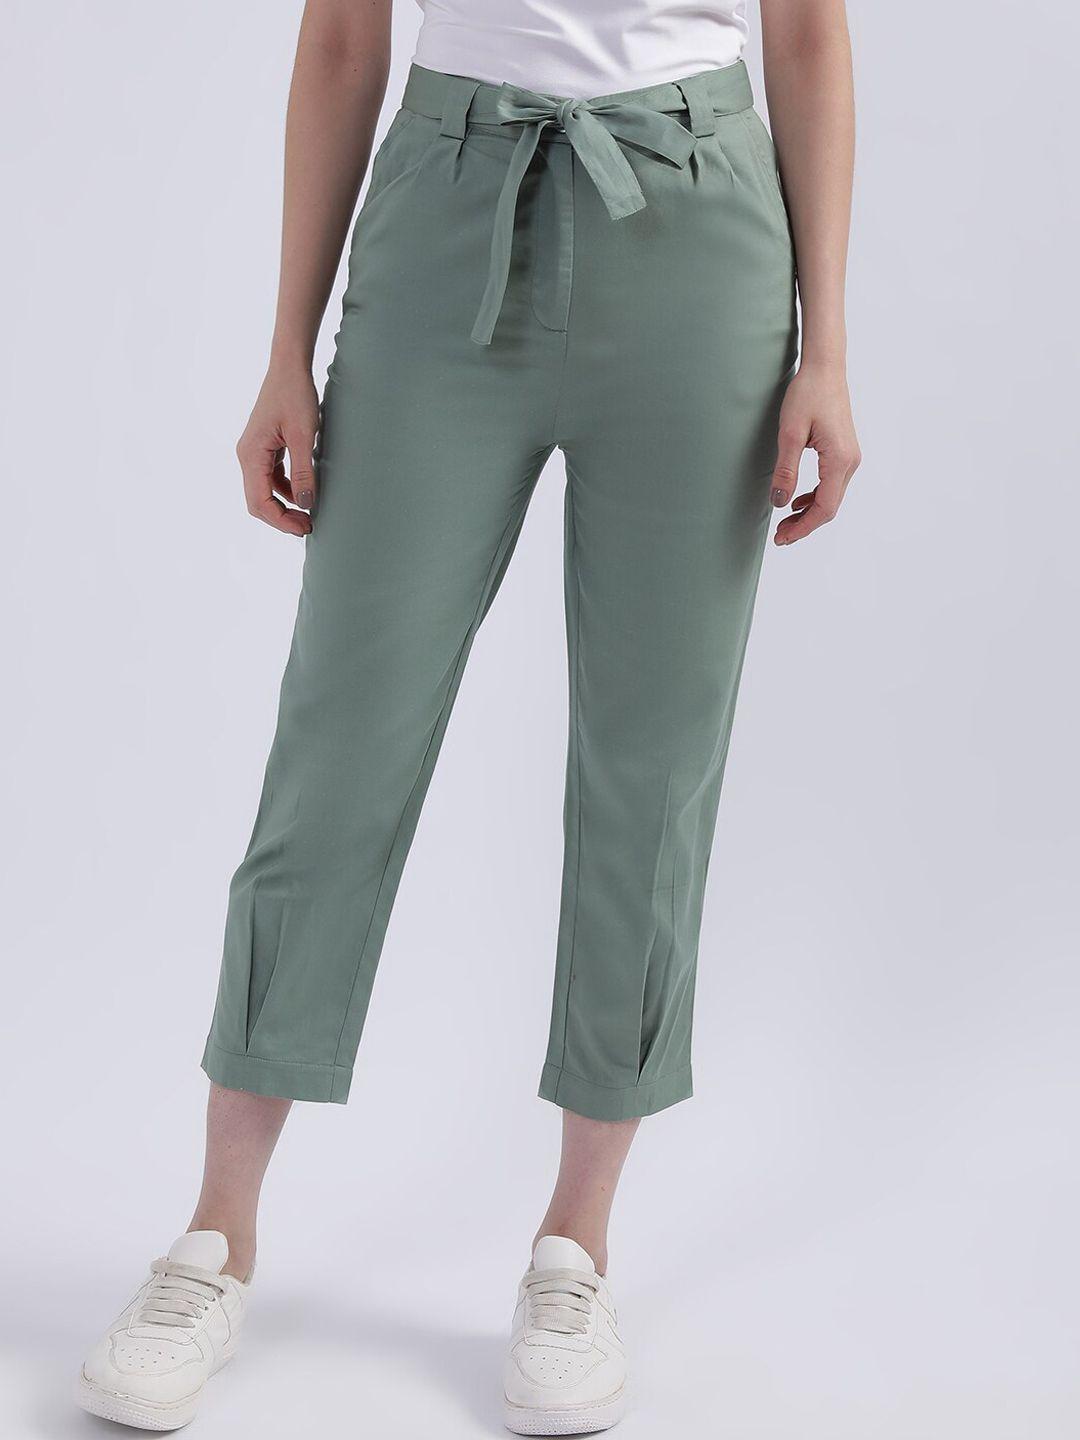 iconic-women-pure-cotton-chinos-trousers